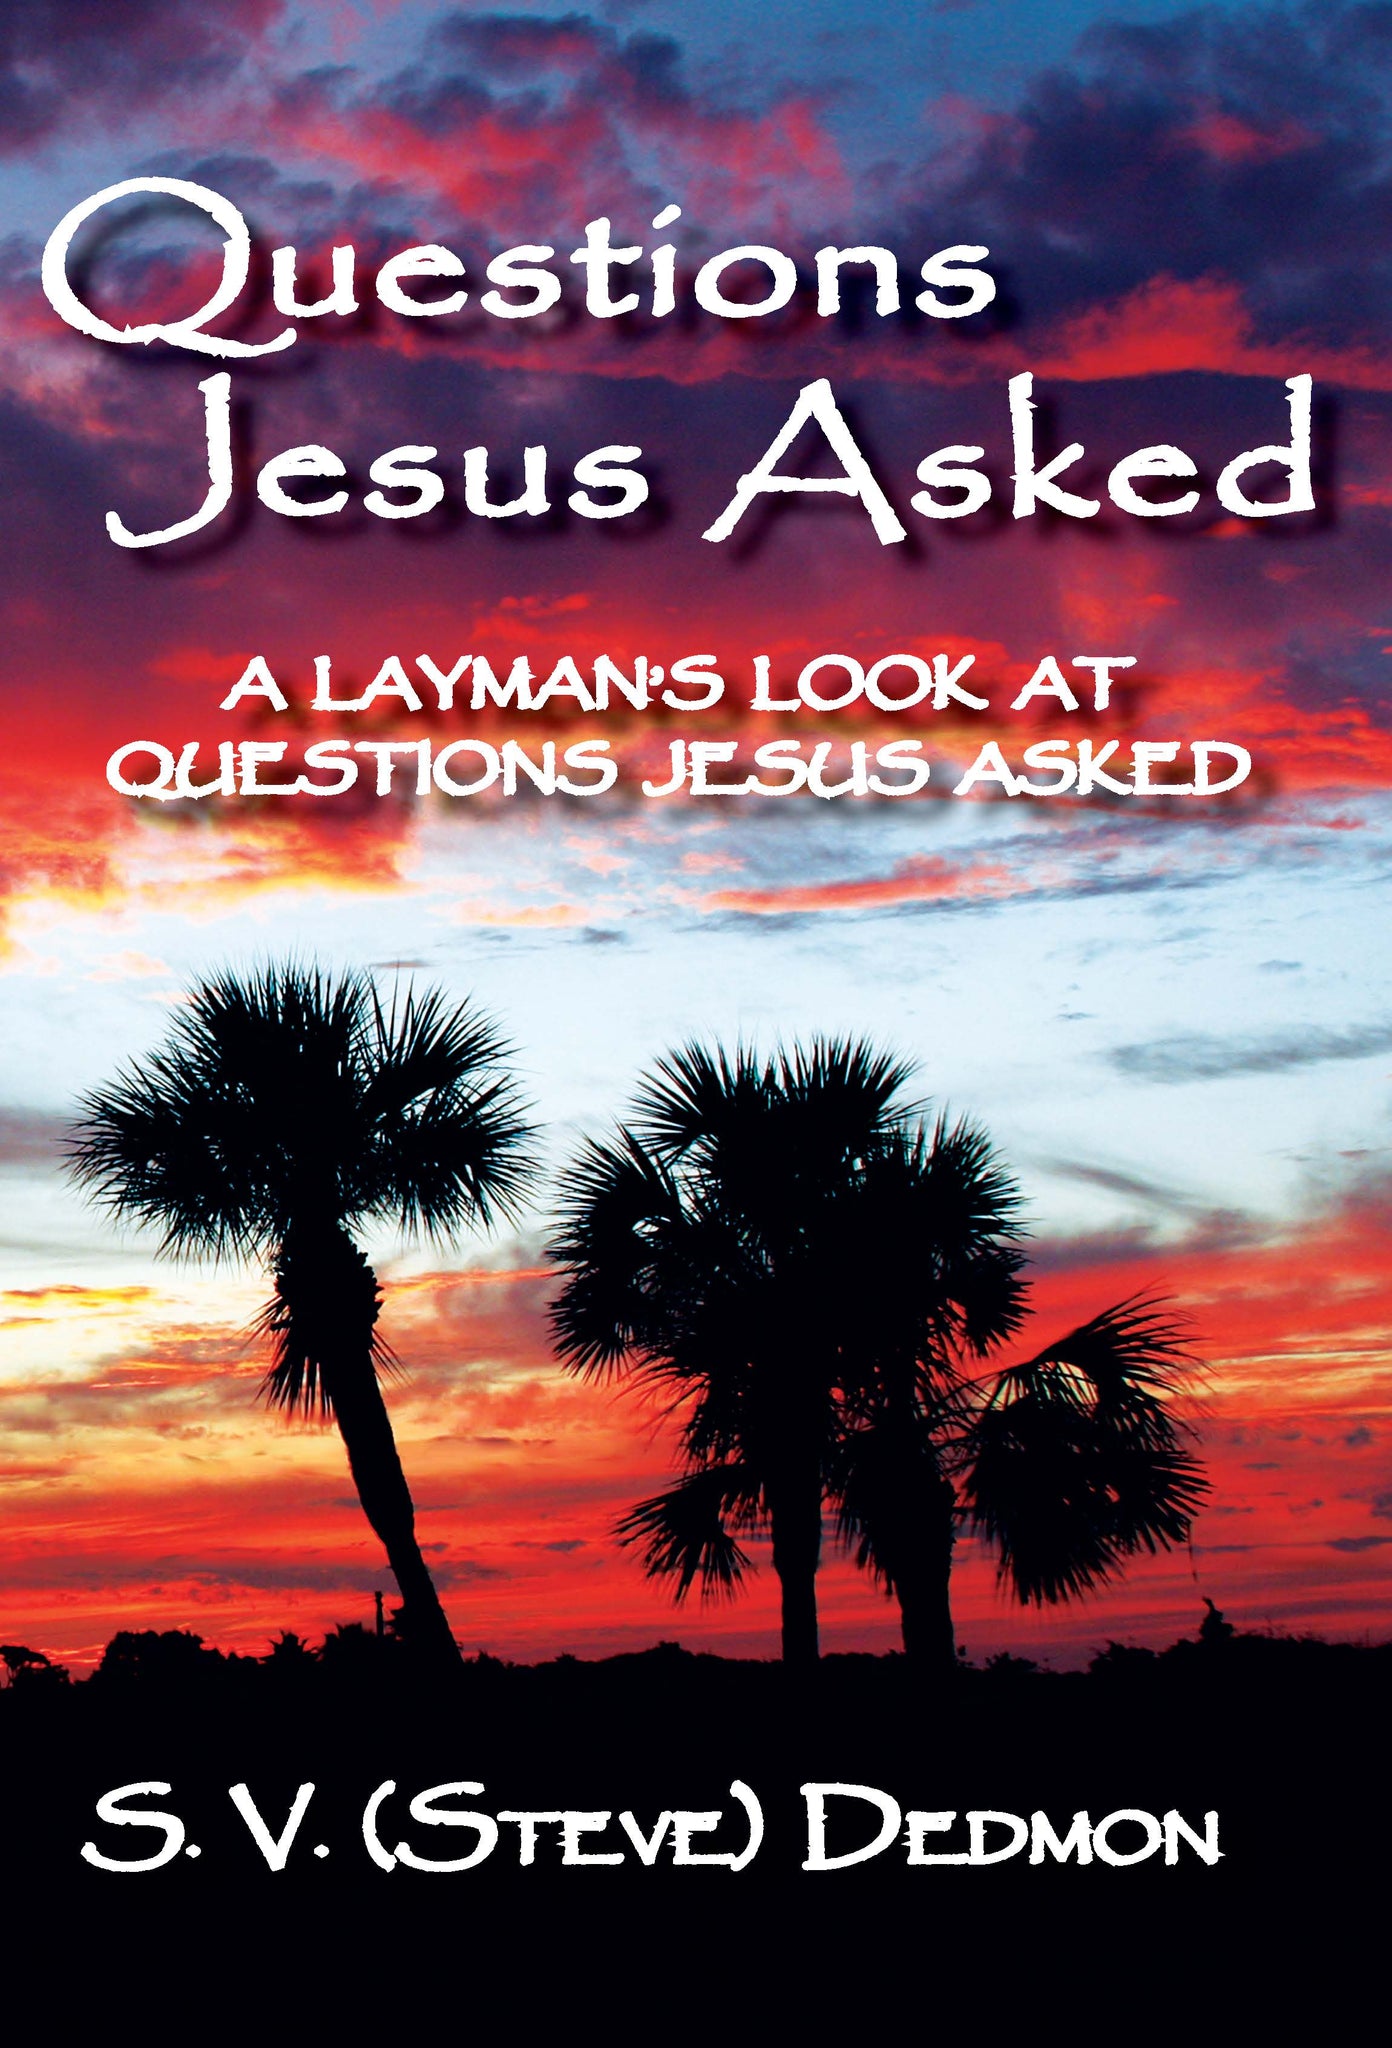 A Layman's Look at  Questions Jesus Asked By S. V. (Steve) Dedmon